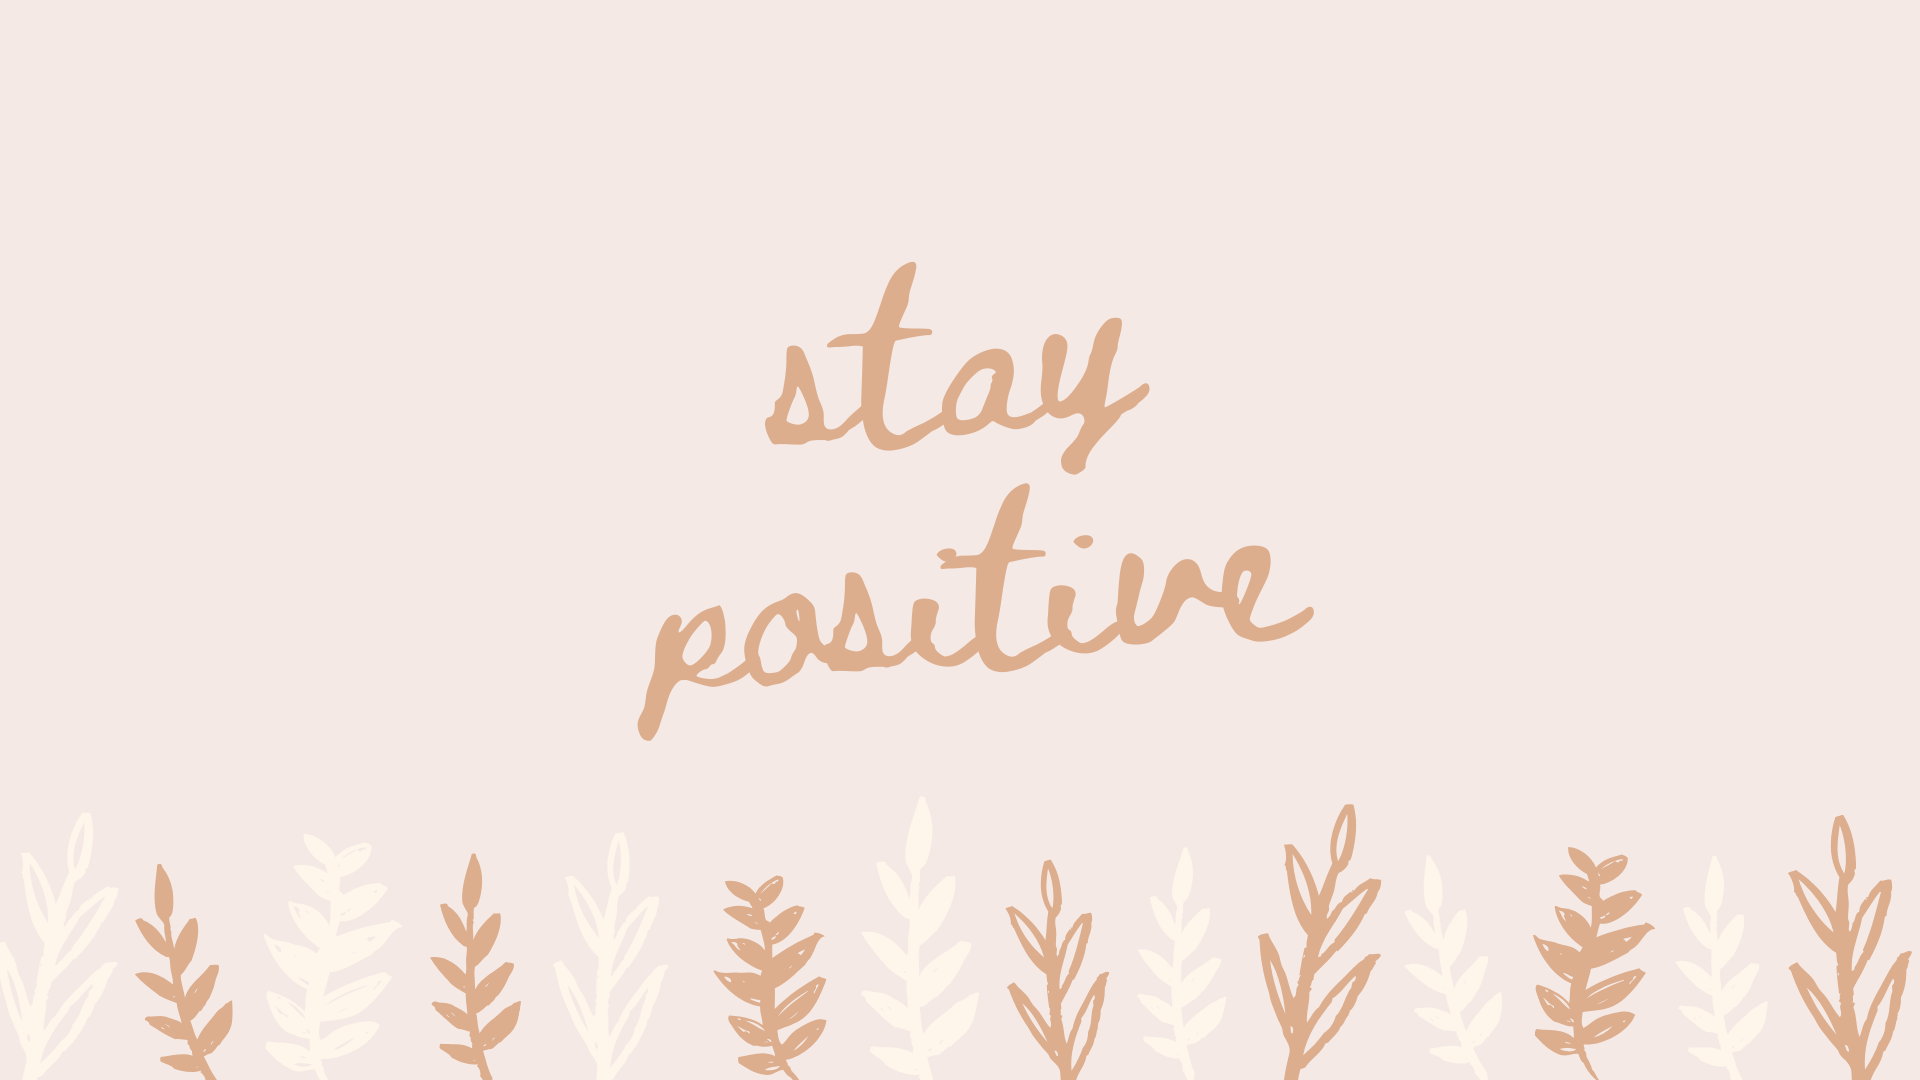 Positive Computer Wallpapers